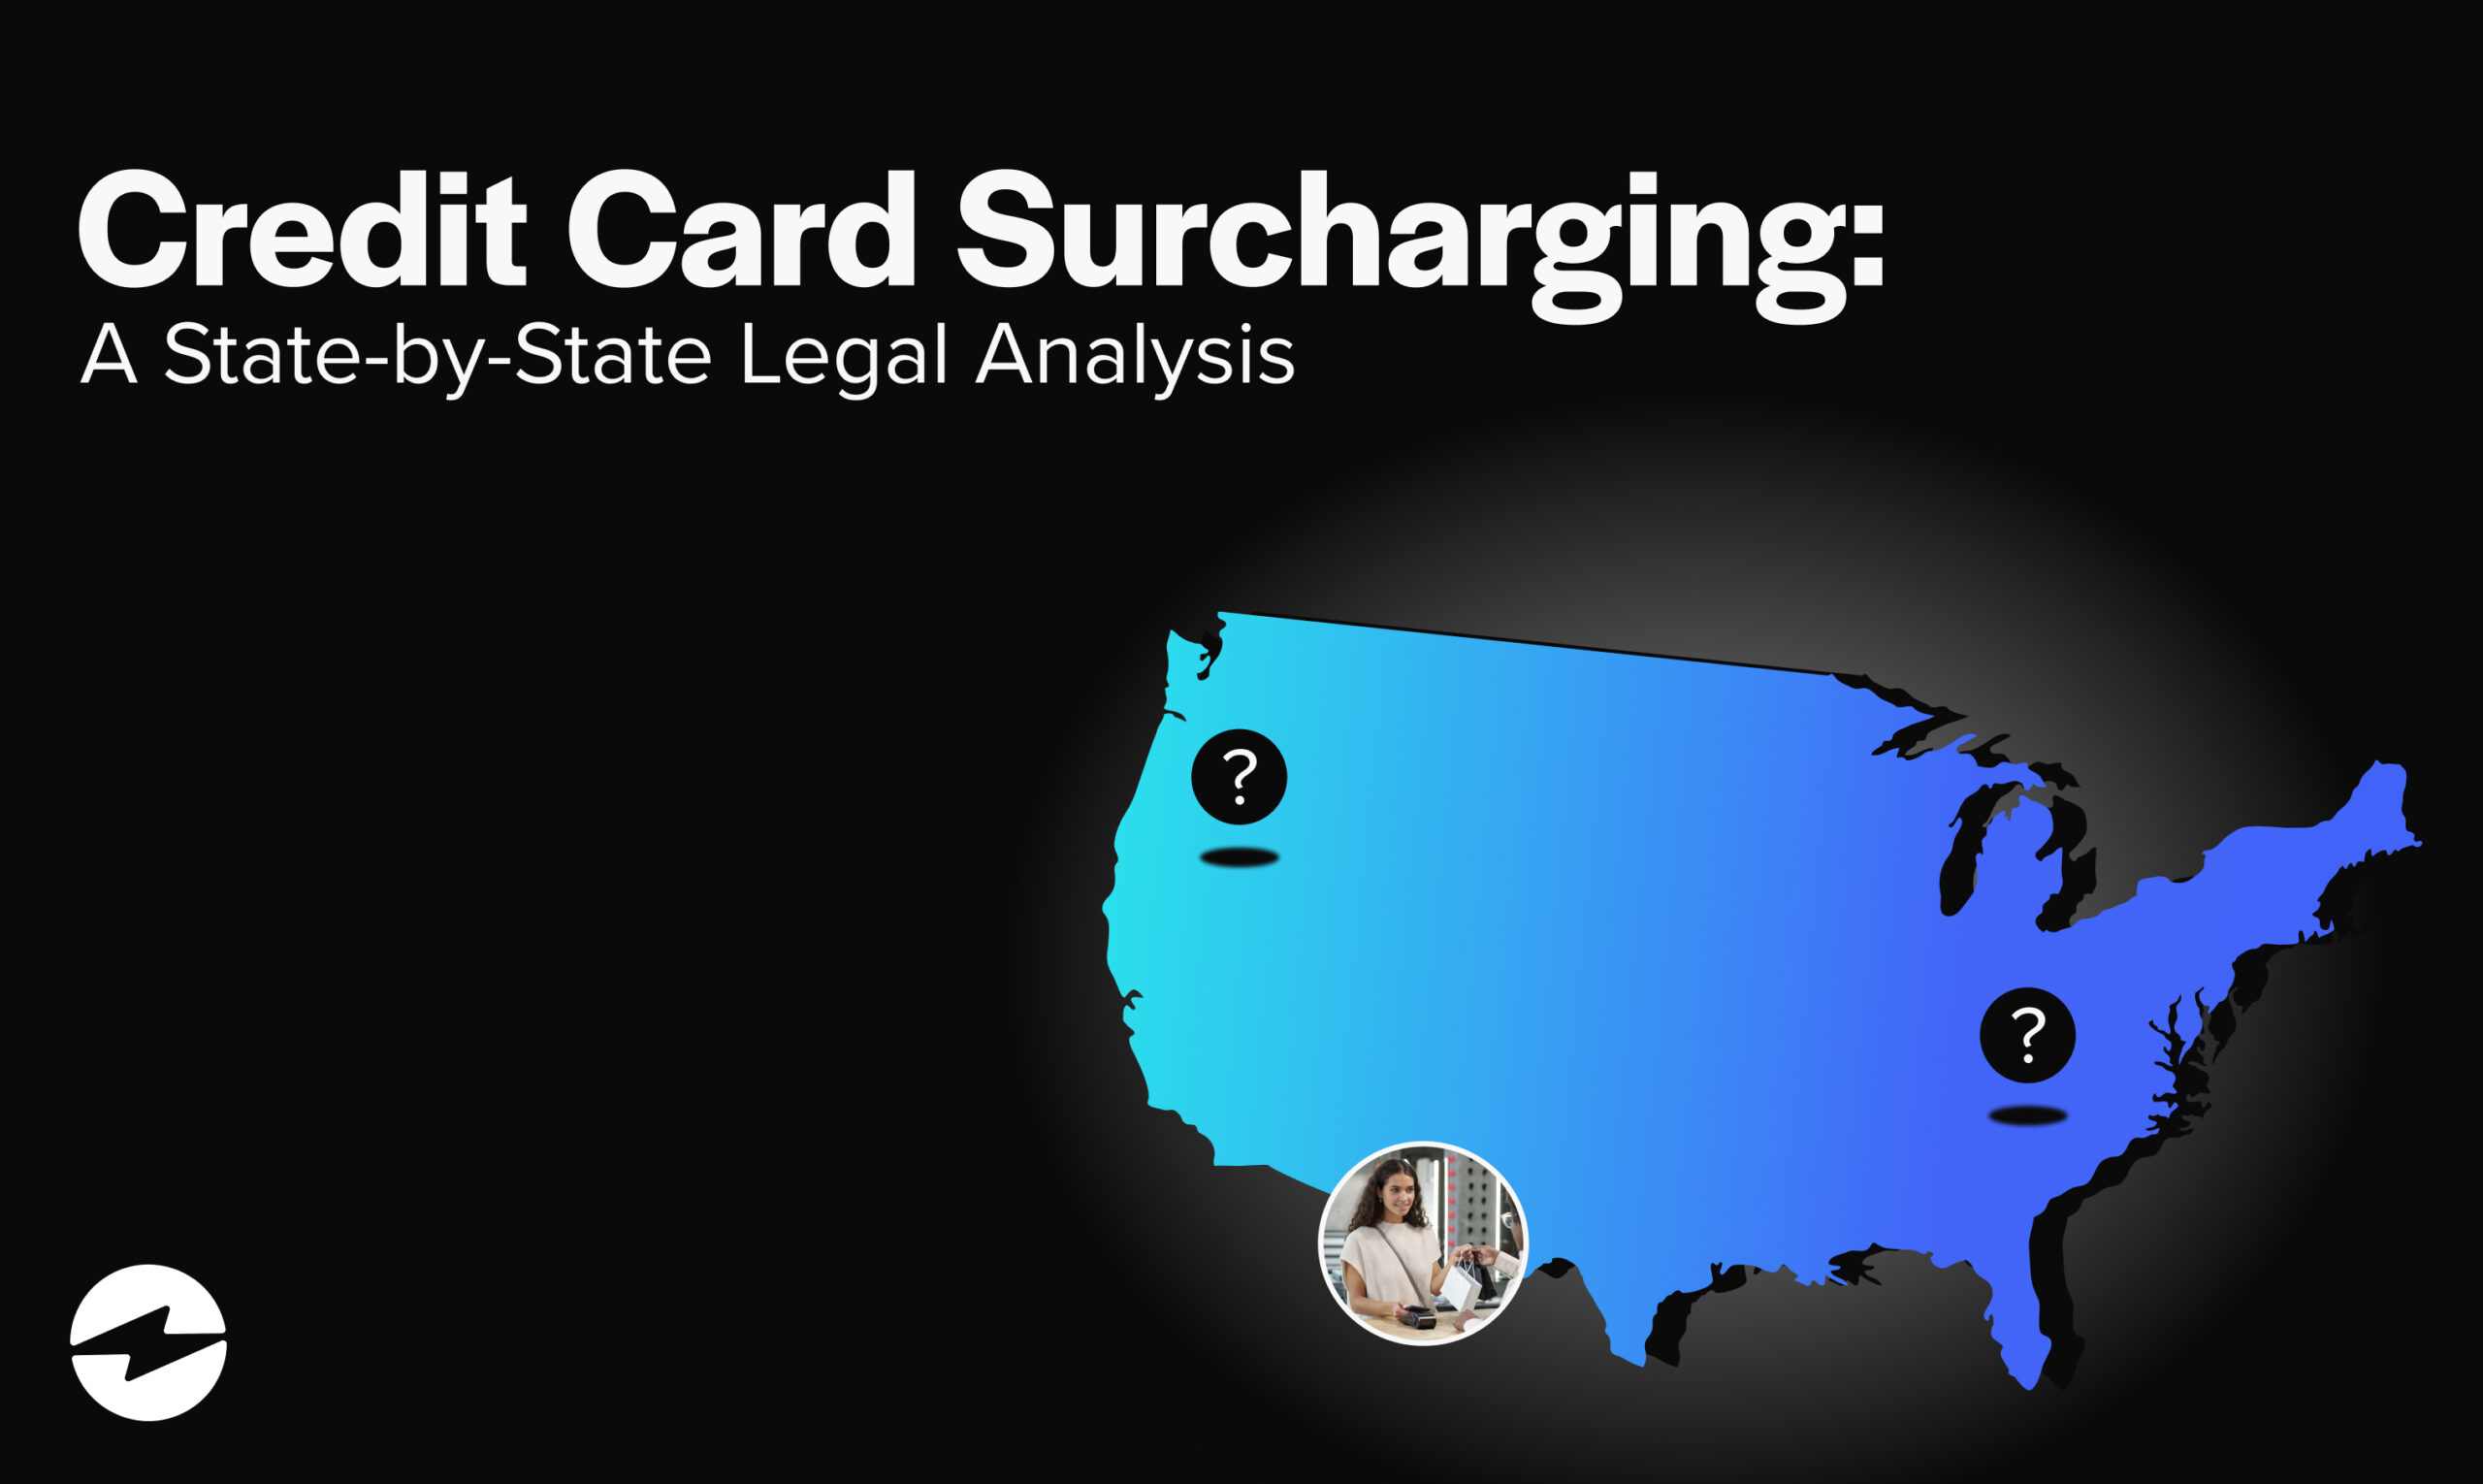 Credit card surcharging: A state-by-state legal analysis